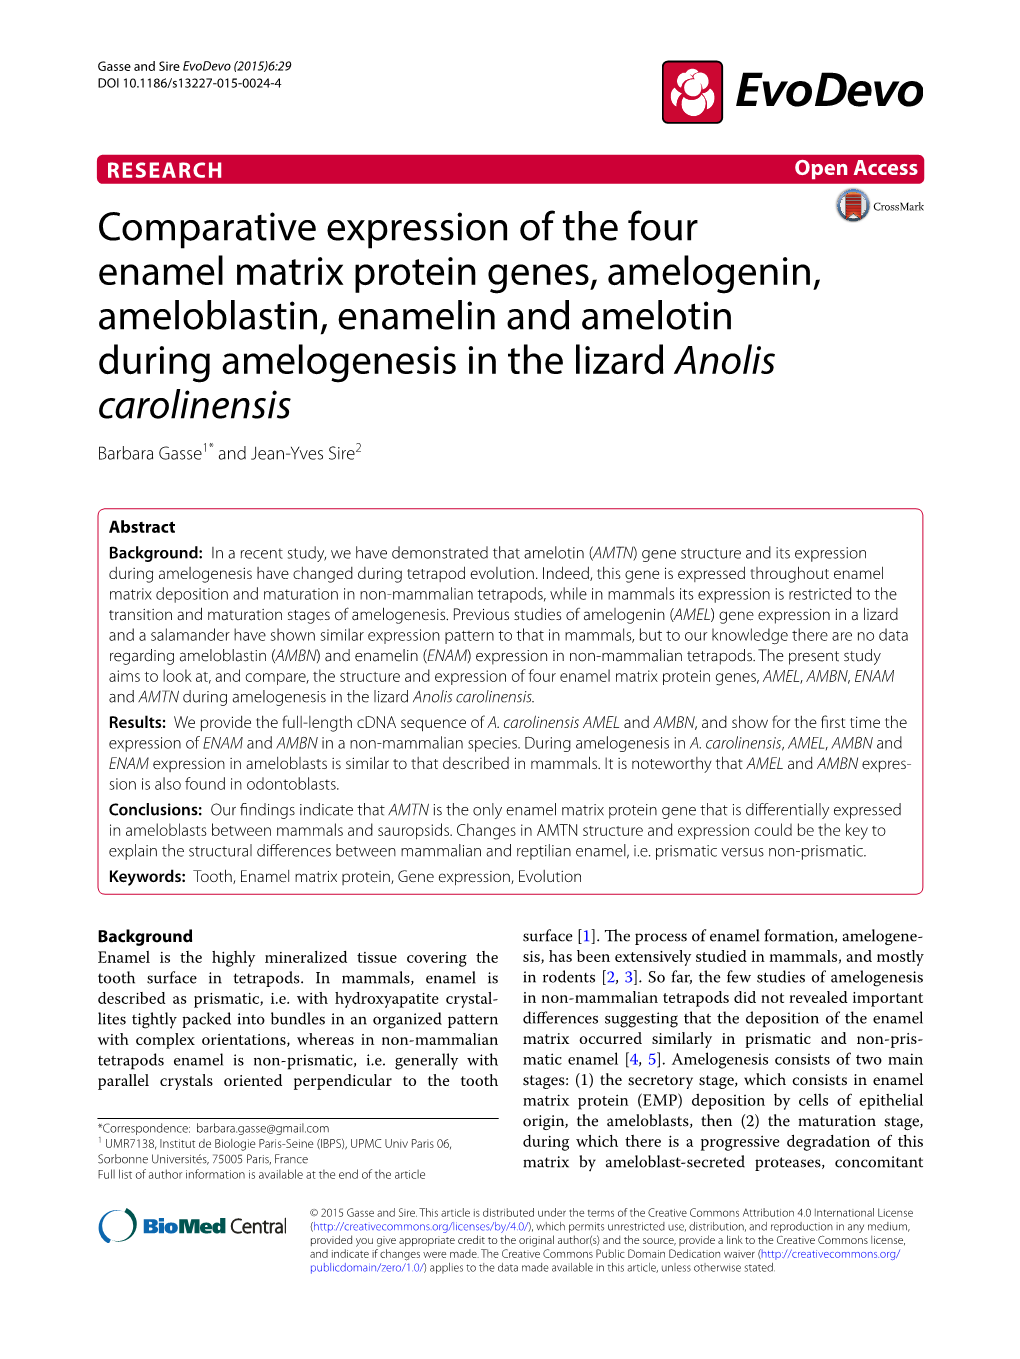 Comparative Expression of the Four Enamel Matrix Protein Genes